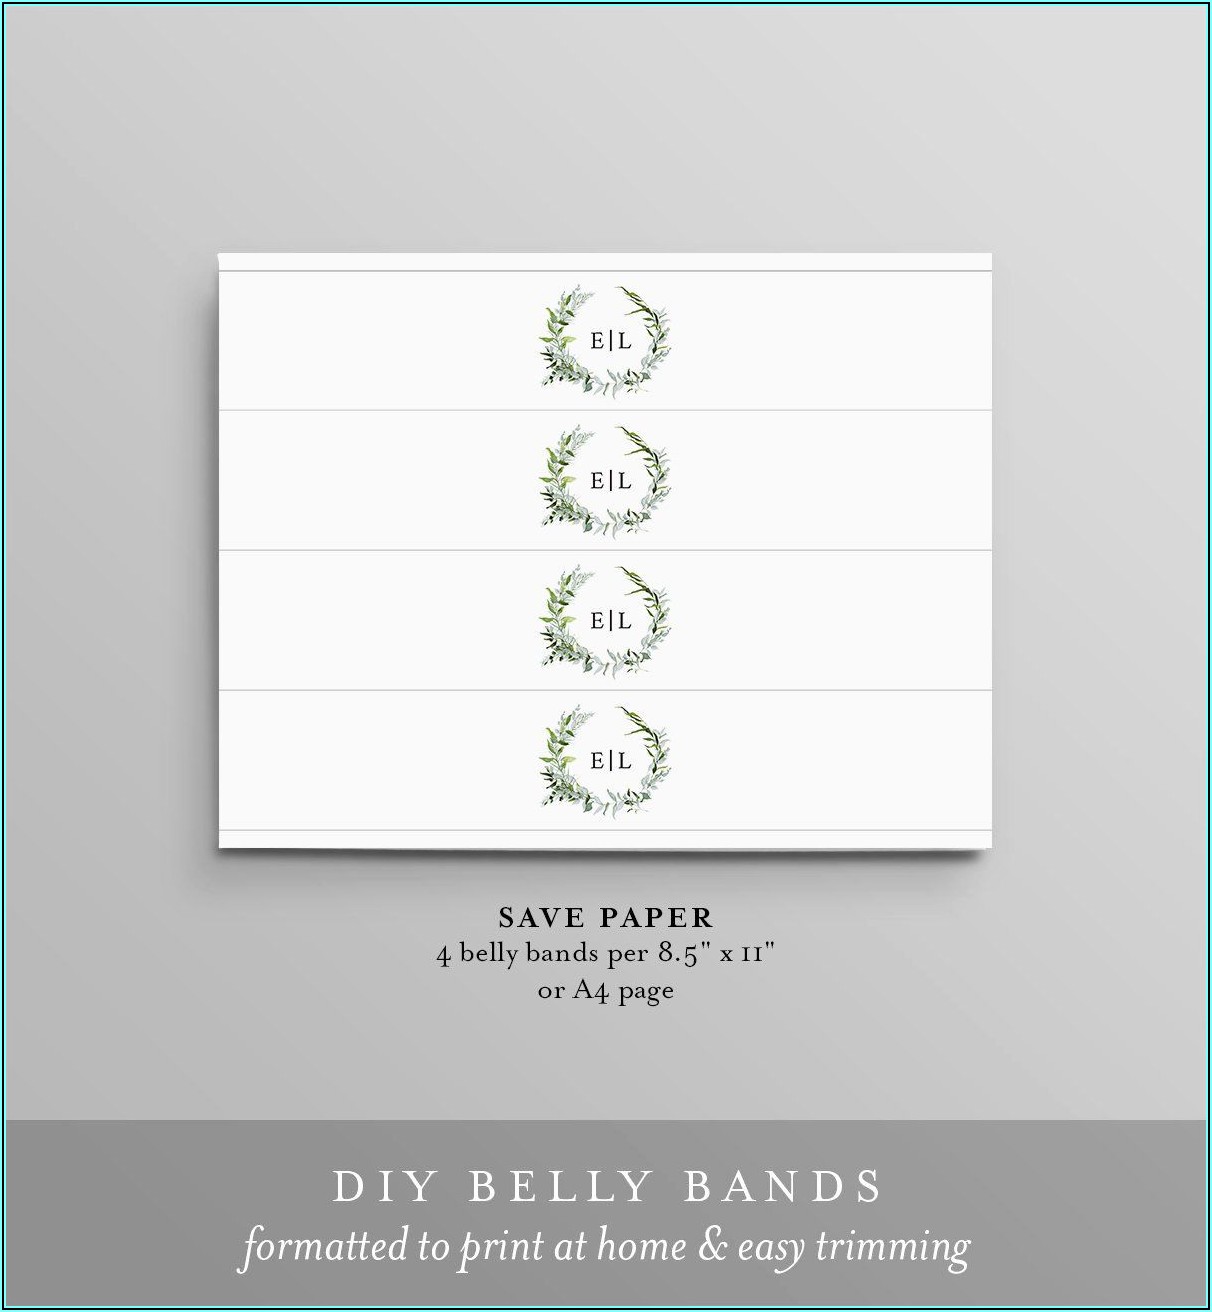 Wedding Invitation Belly Band Template